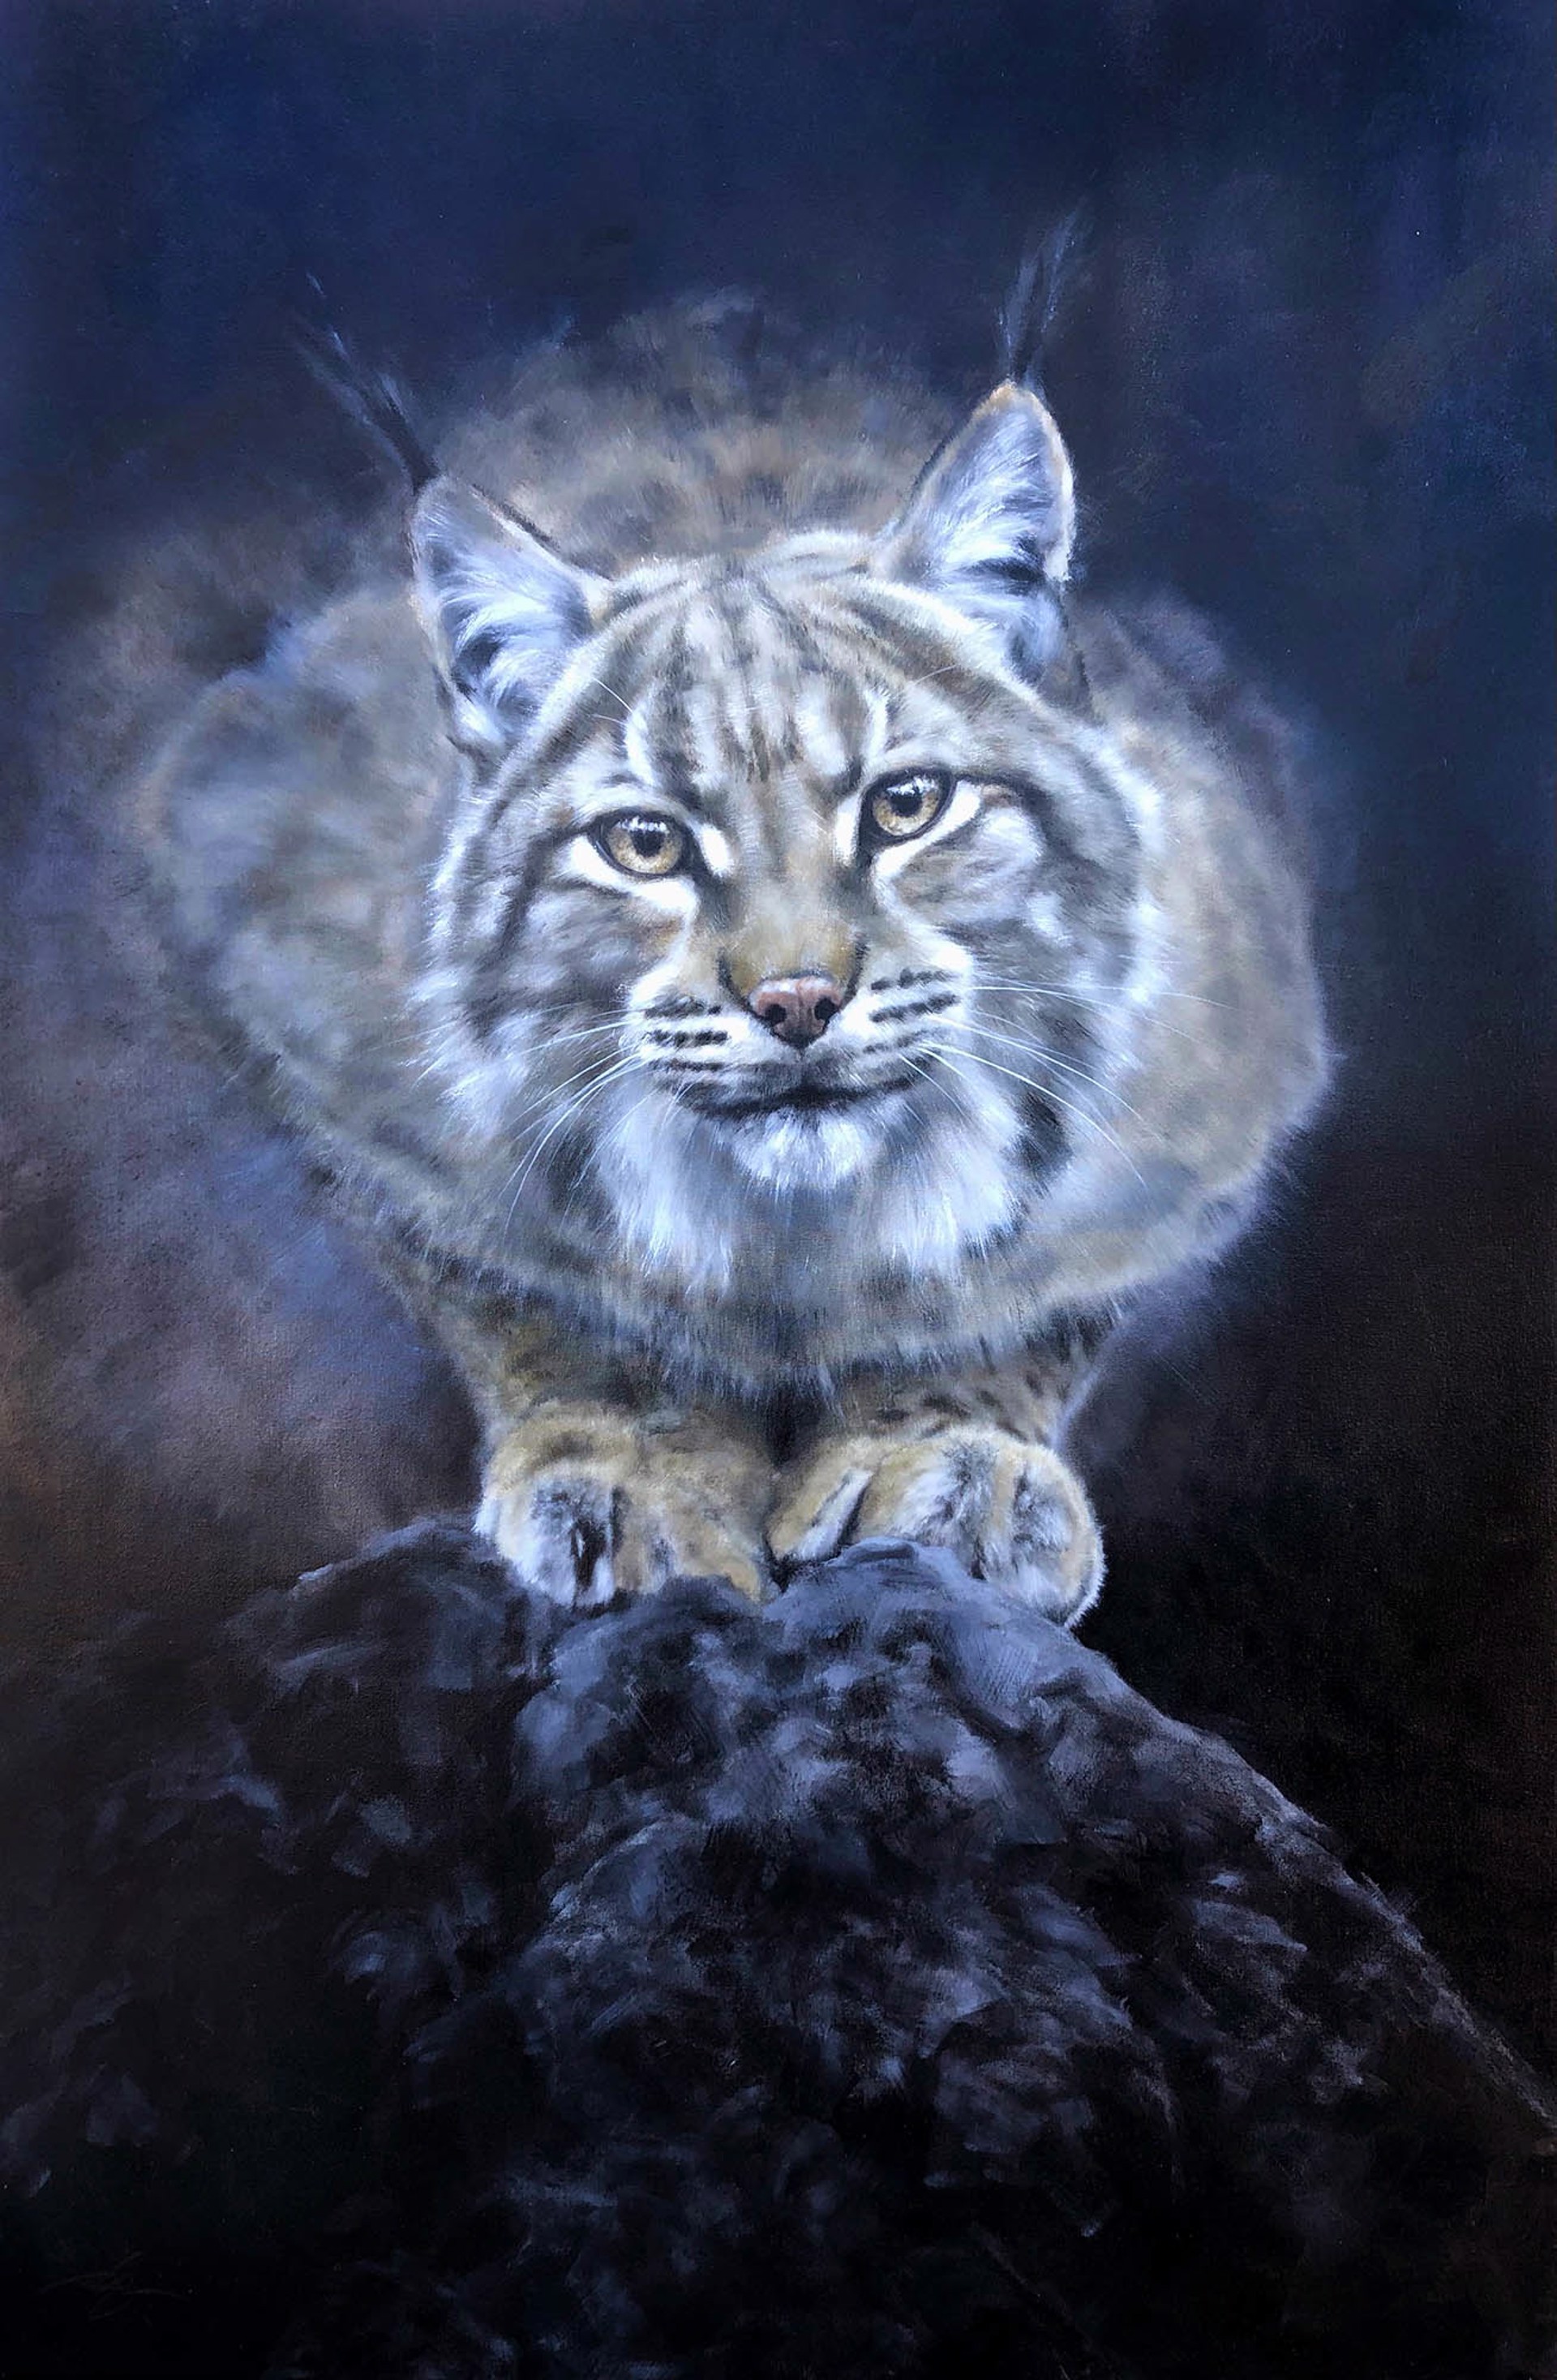 Original Oil Painting By Doyle Hostetler Featuring A Pouncing Bobcat On A Rock